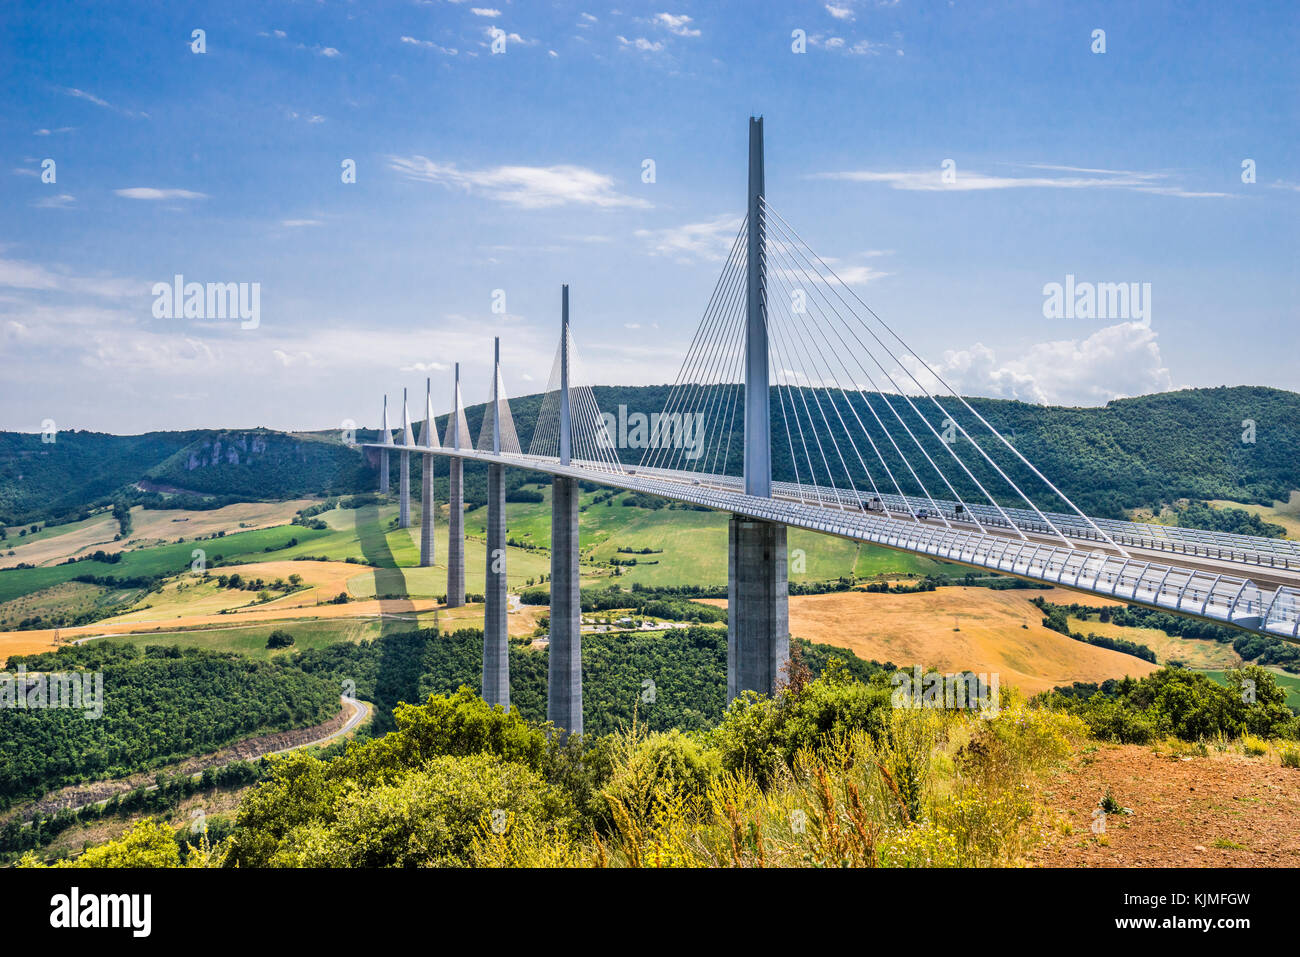 France, Region Occitanie, Aveyron department, Millau Viaduct (le Viaduc de Millau), cable-stayed bridge spanning the gorge valley of the River Tarn Stock Photo